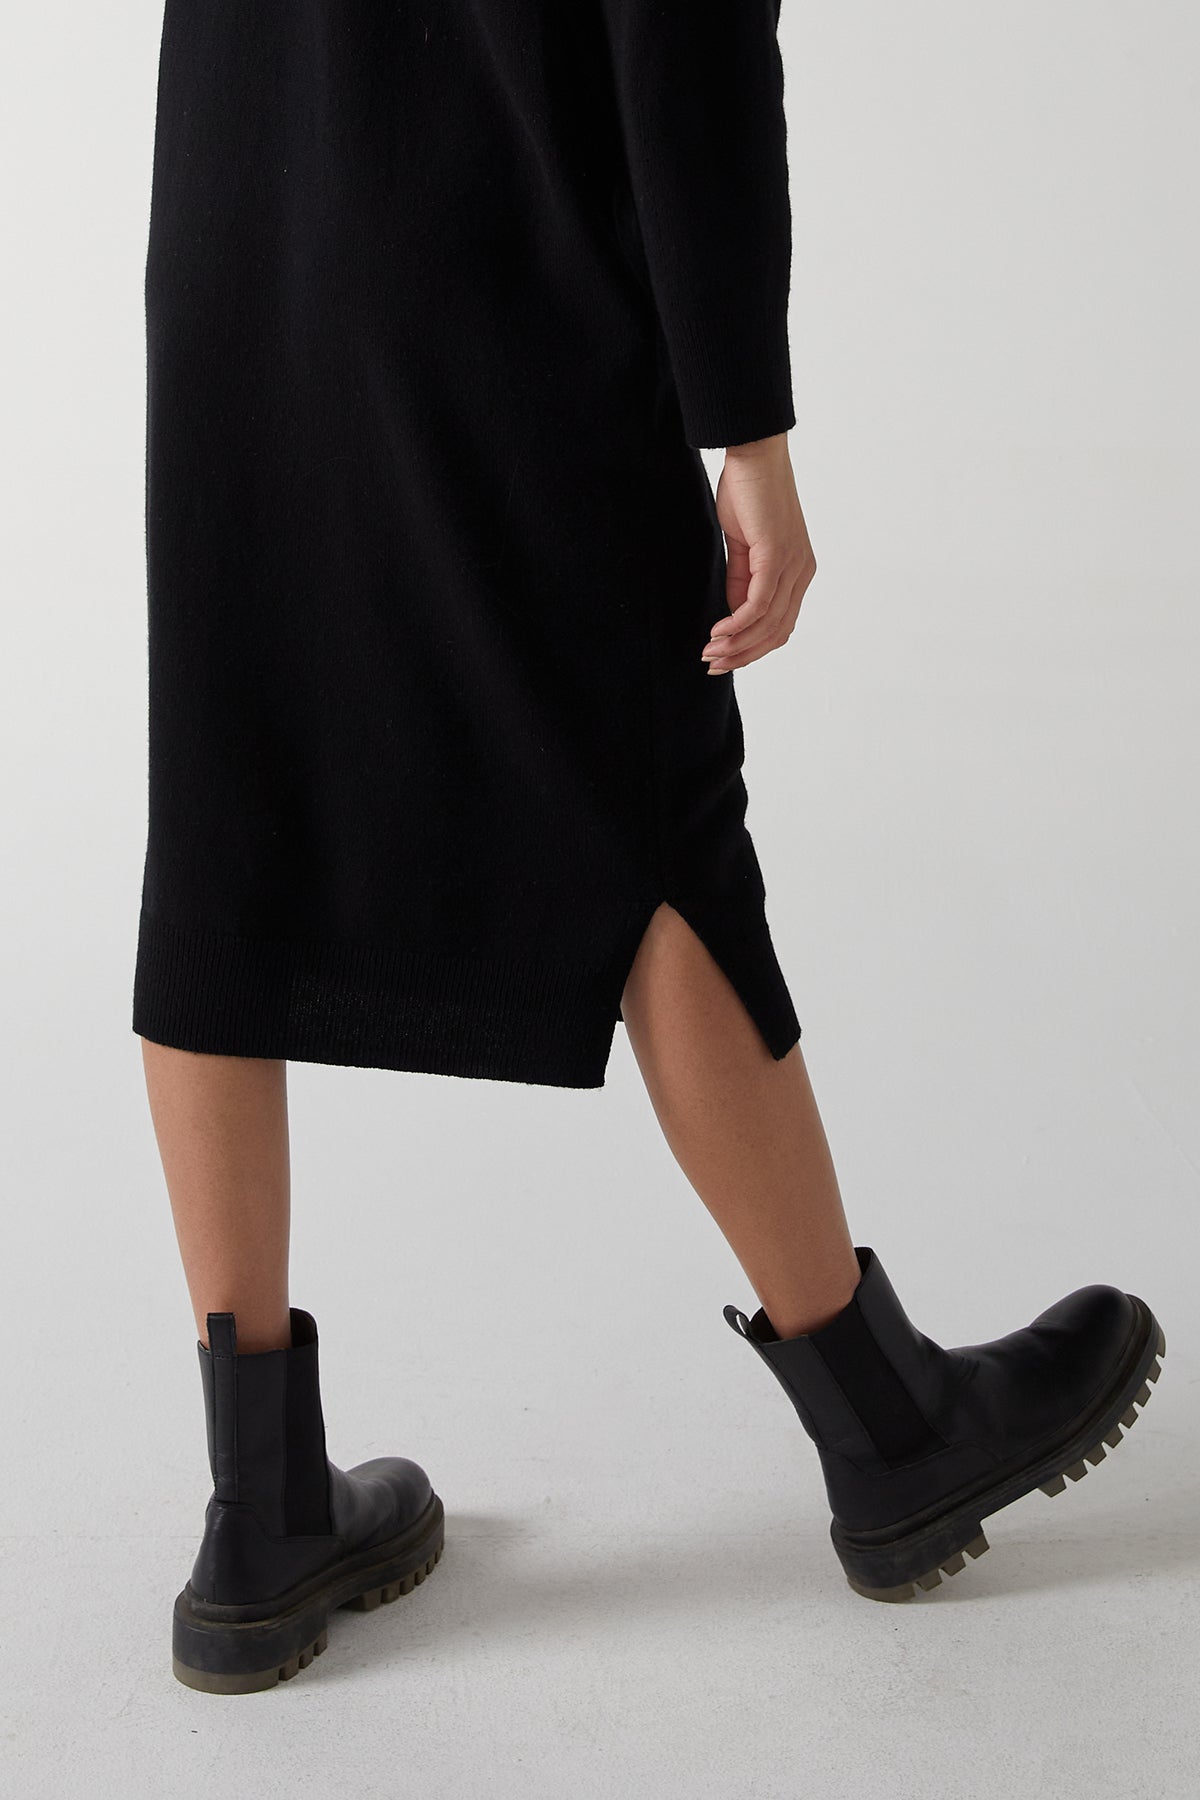 The back view of a woman wearing a Velvet by Jenny Graham LAUREL DRESS, a minimal silhouette black sweater dress with side hem slits, paired with black boots.-25315829678273